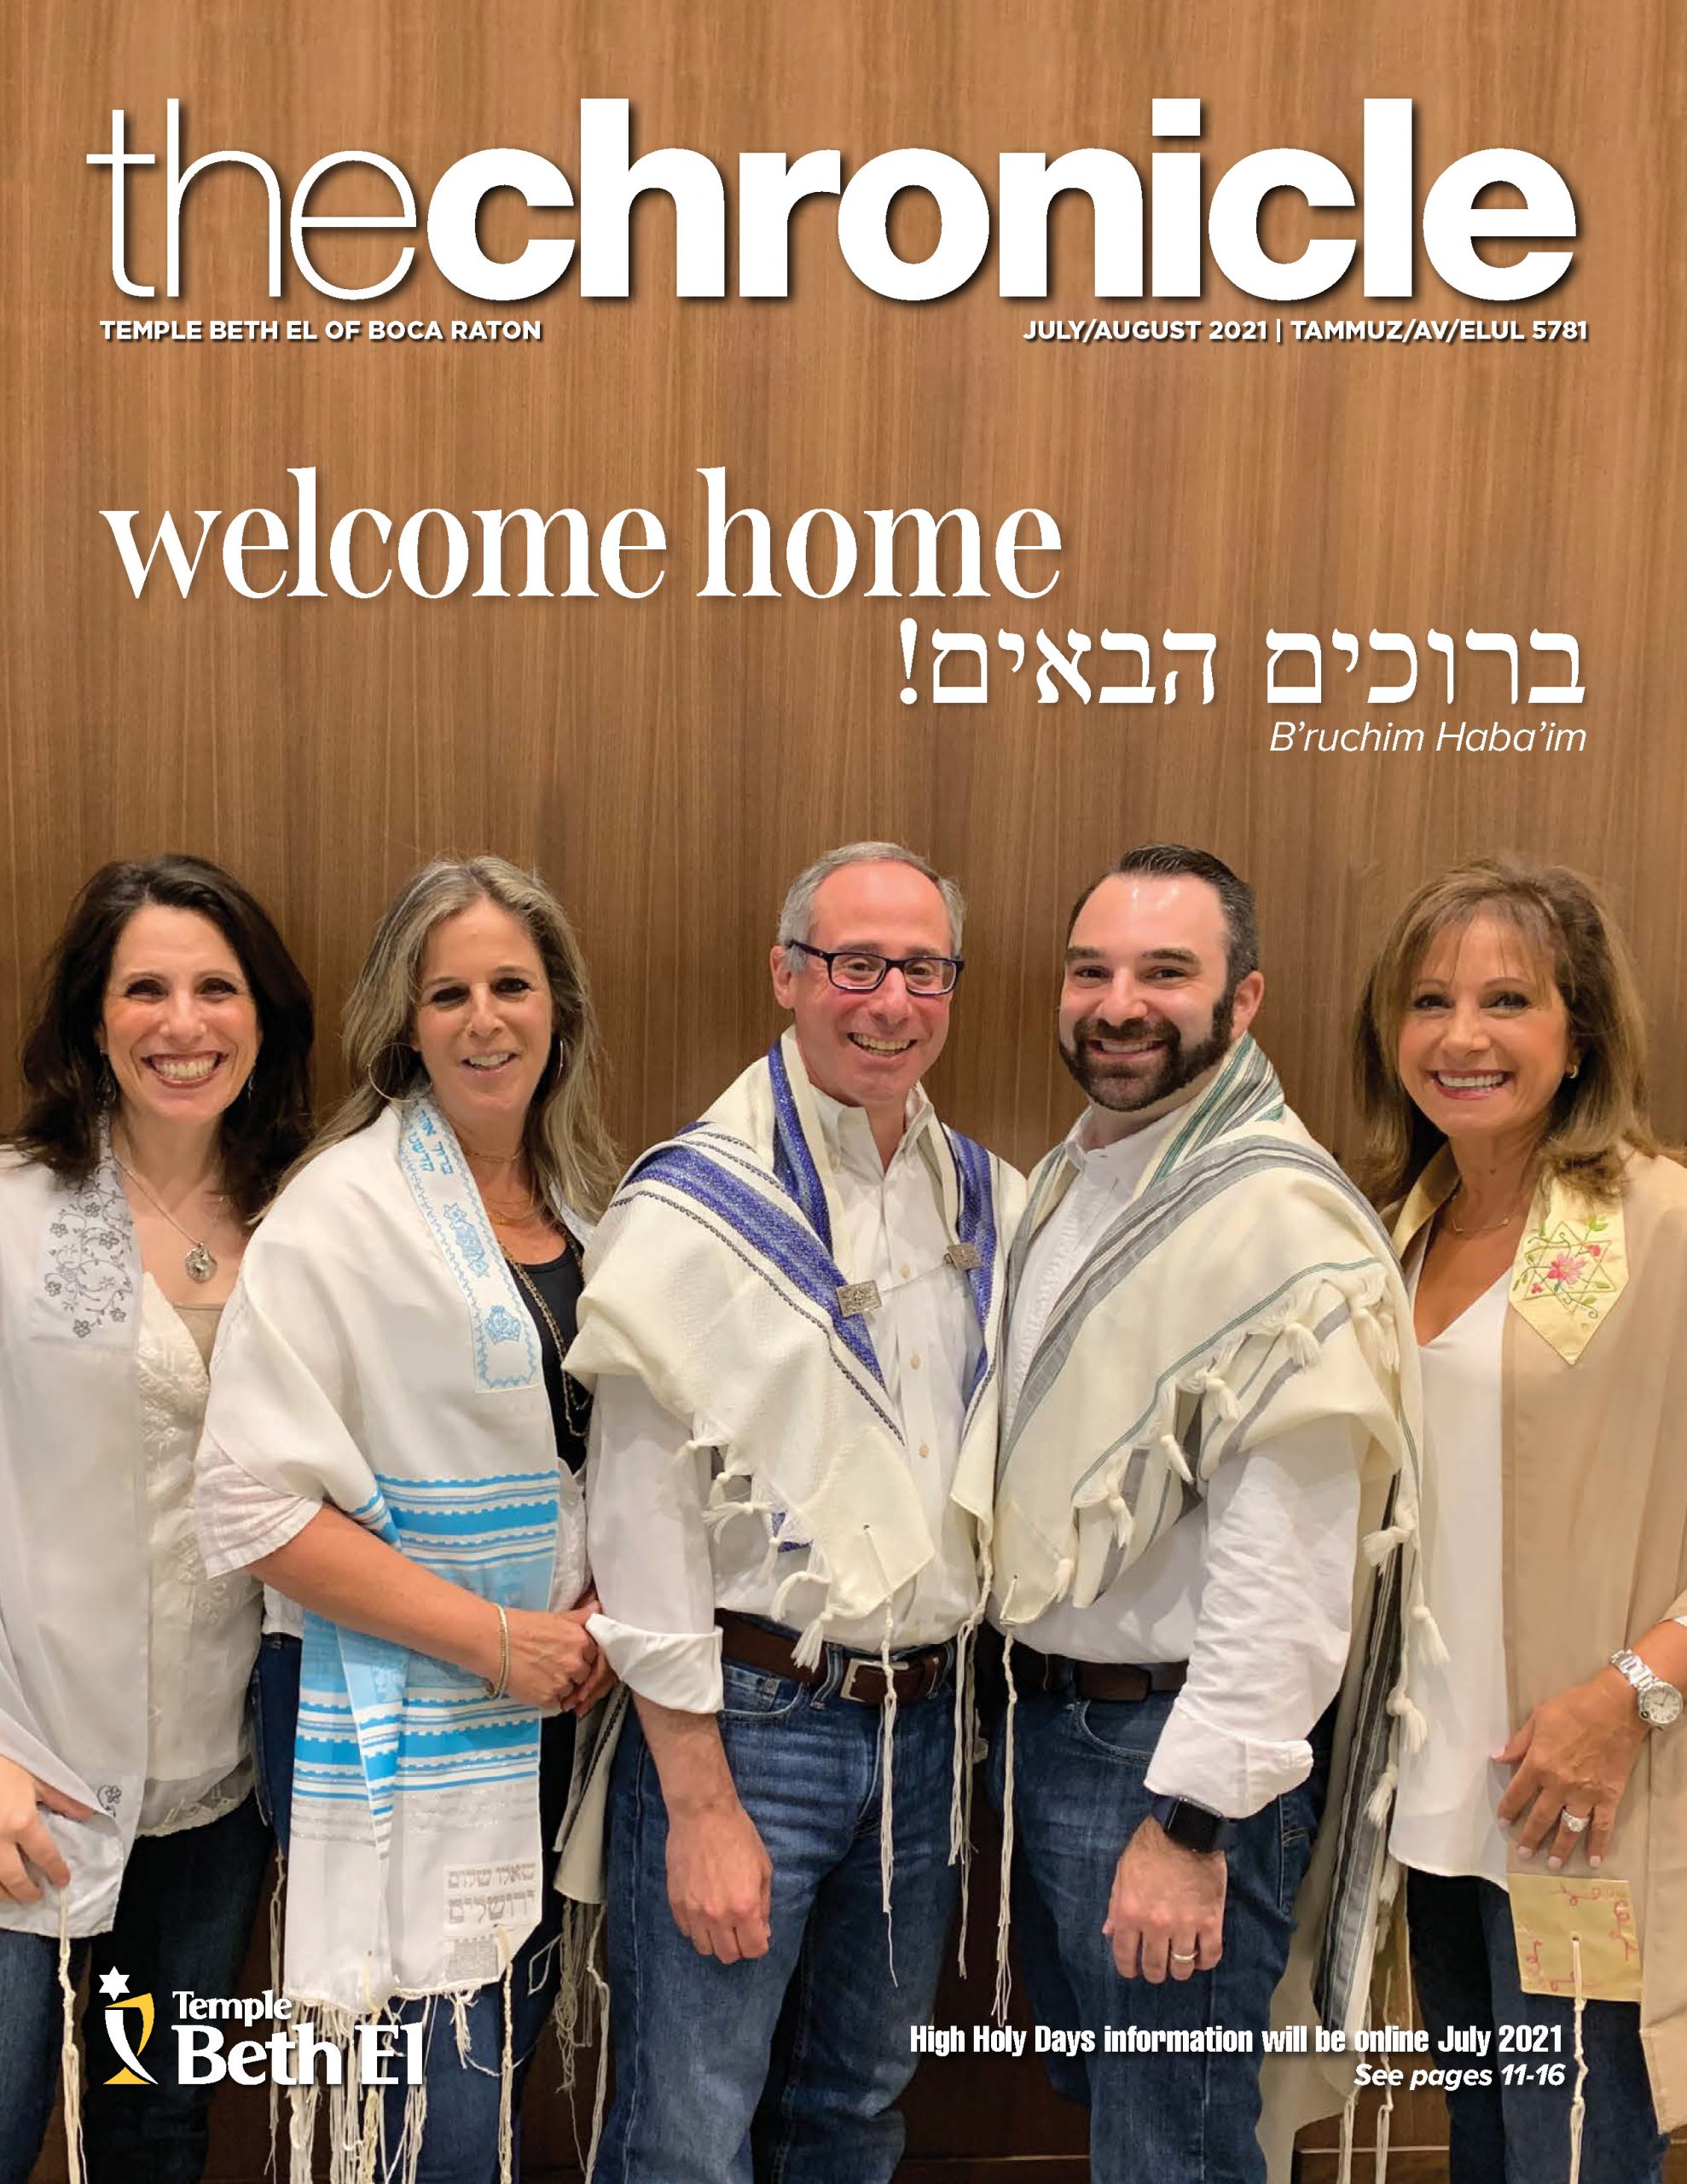 The Chronicle, July August 2021, Newsletter published by Temple Beth El of Boca Raton, Fl